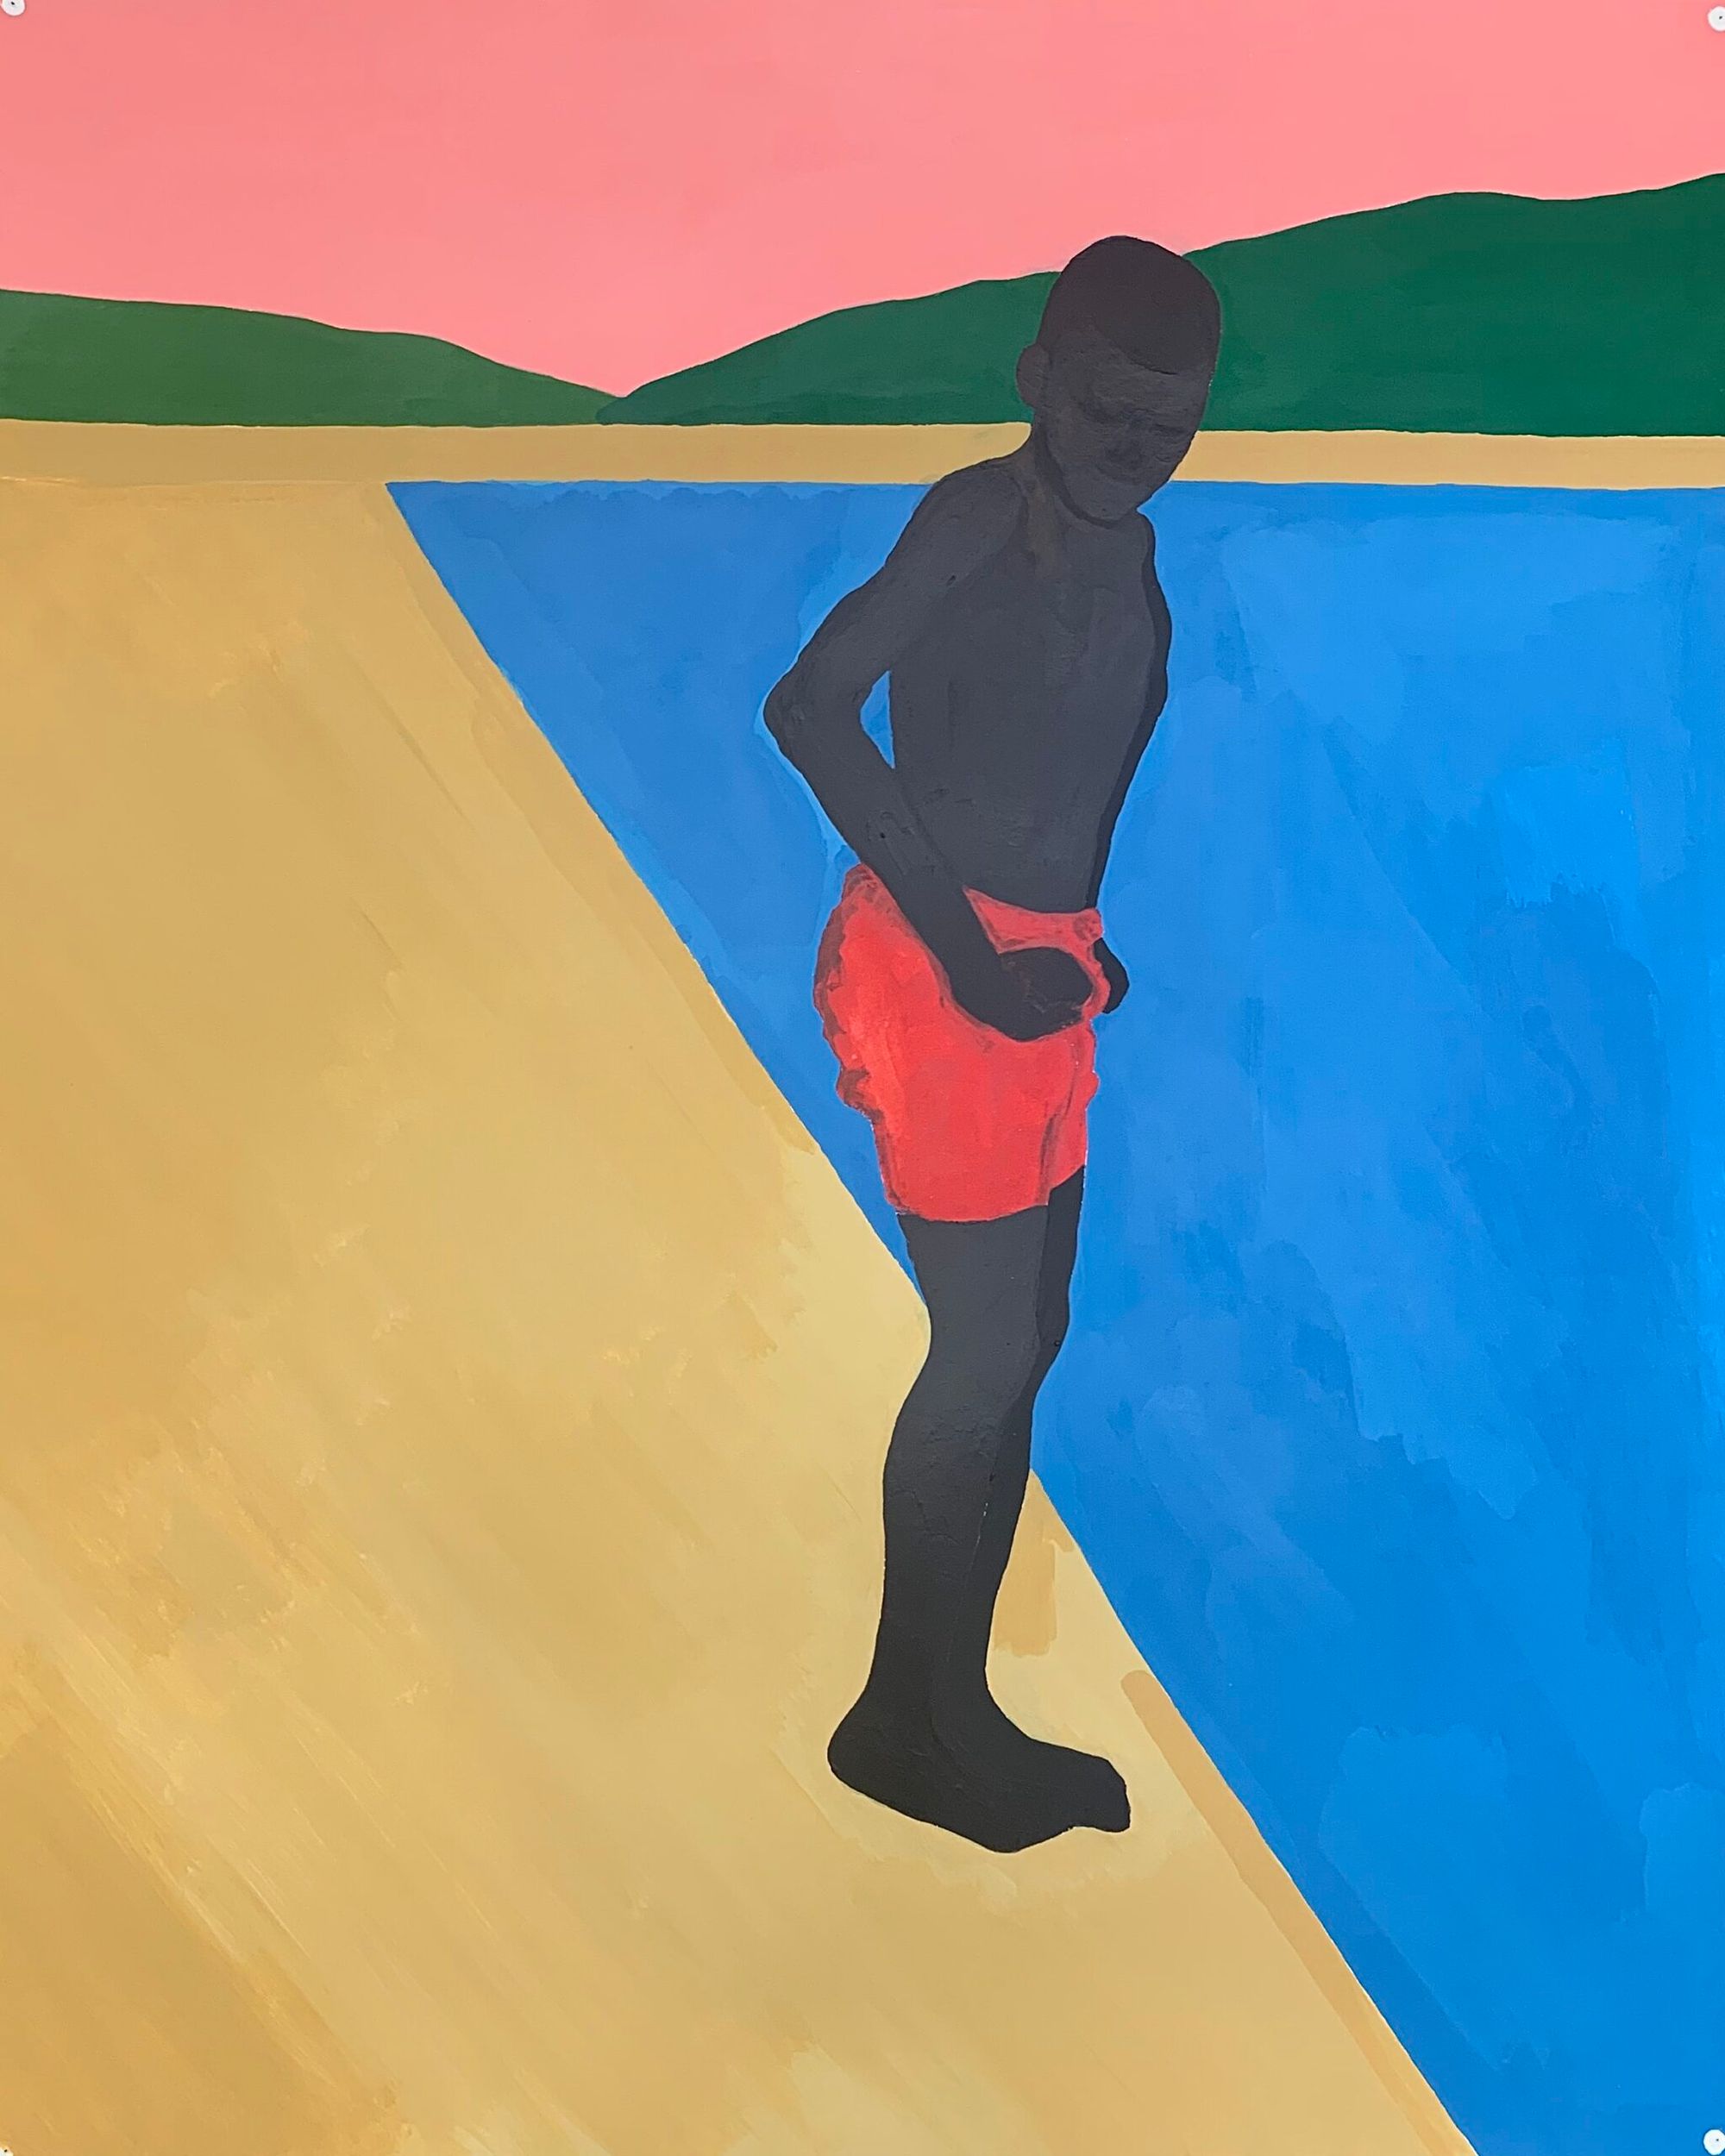 black figure by the pool